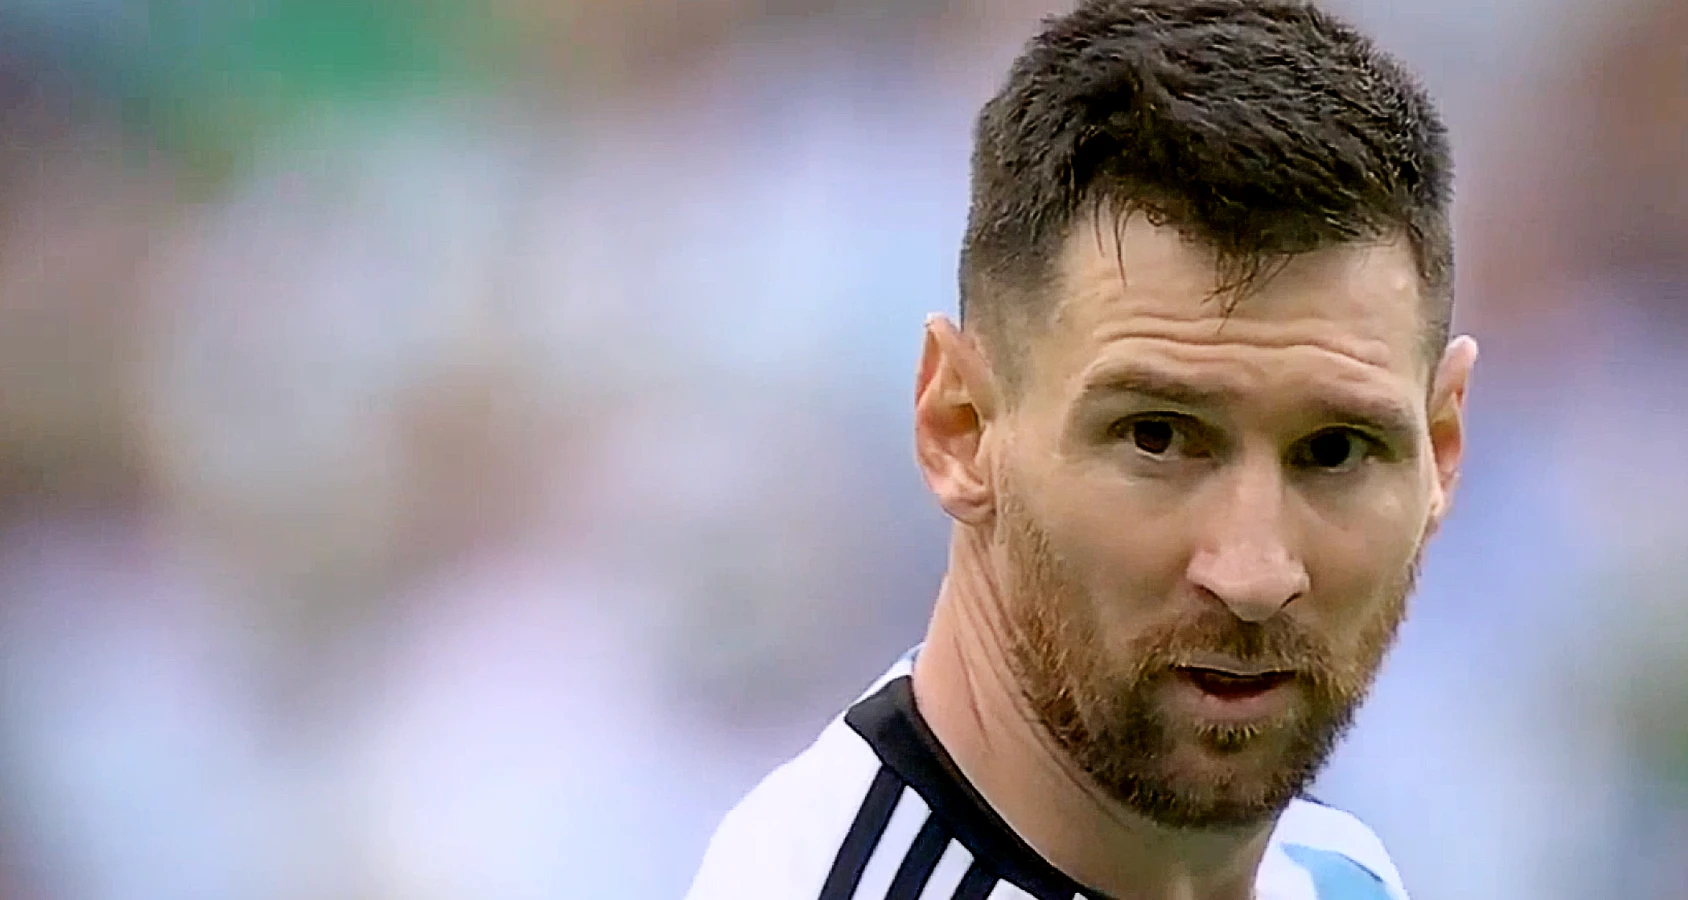 Lionel Messi looks on after Argentina lost at the World Cup 2022